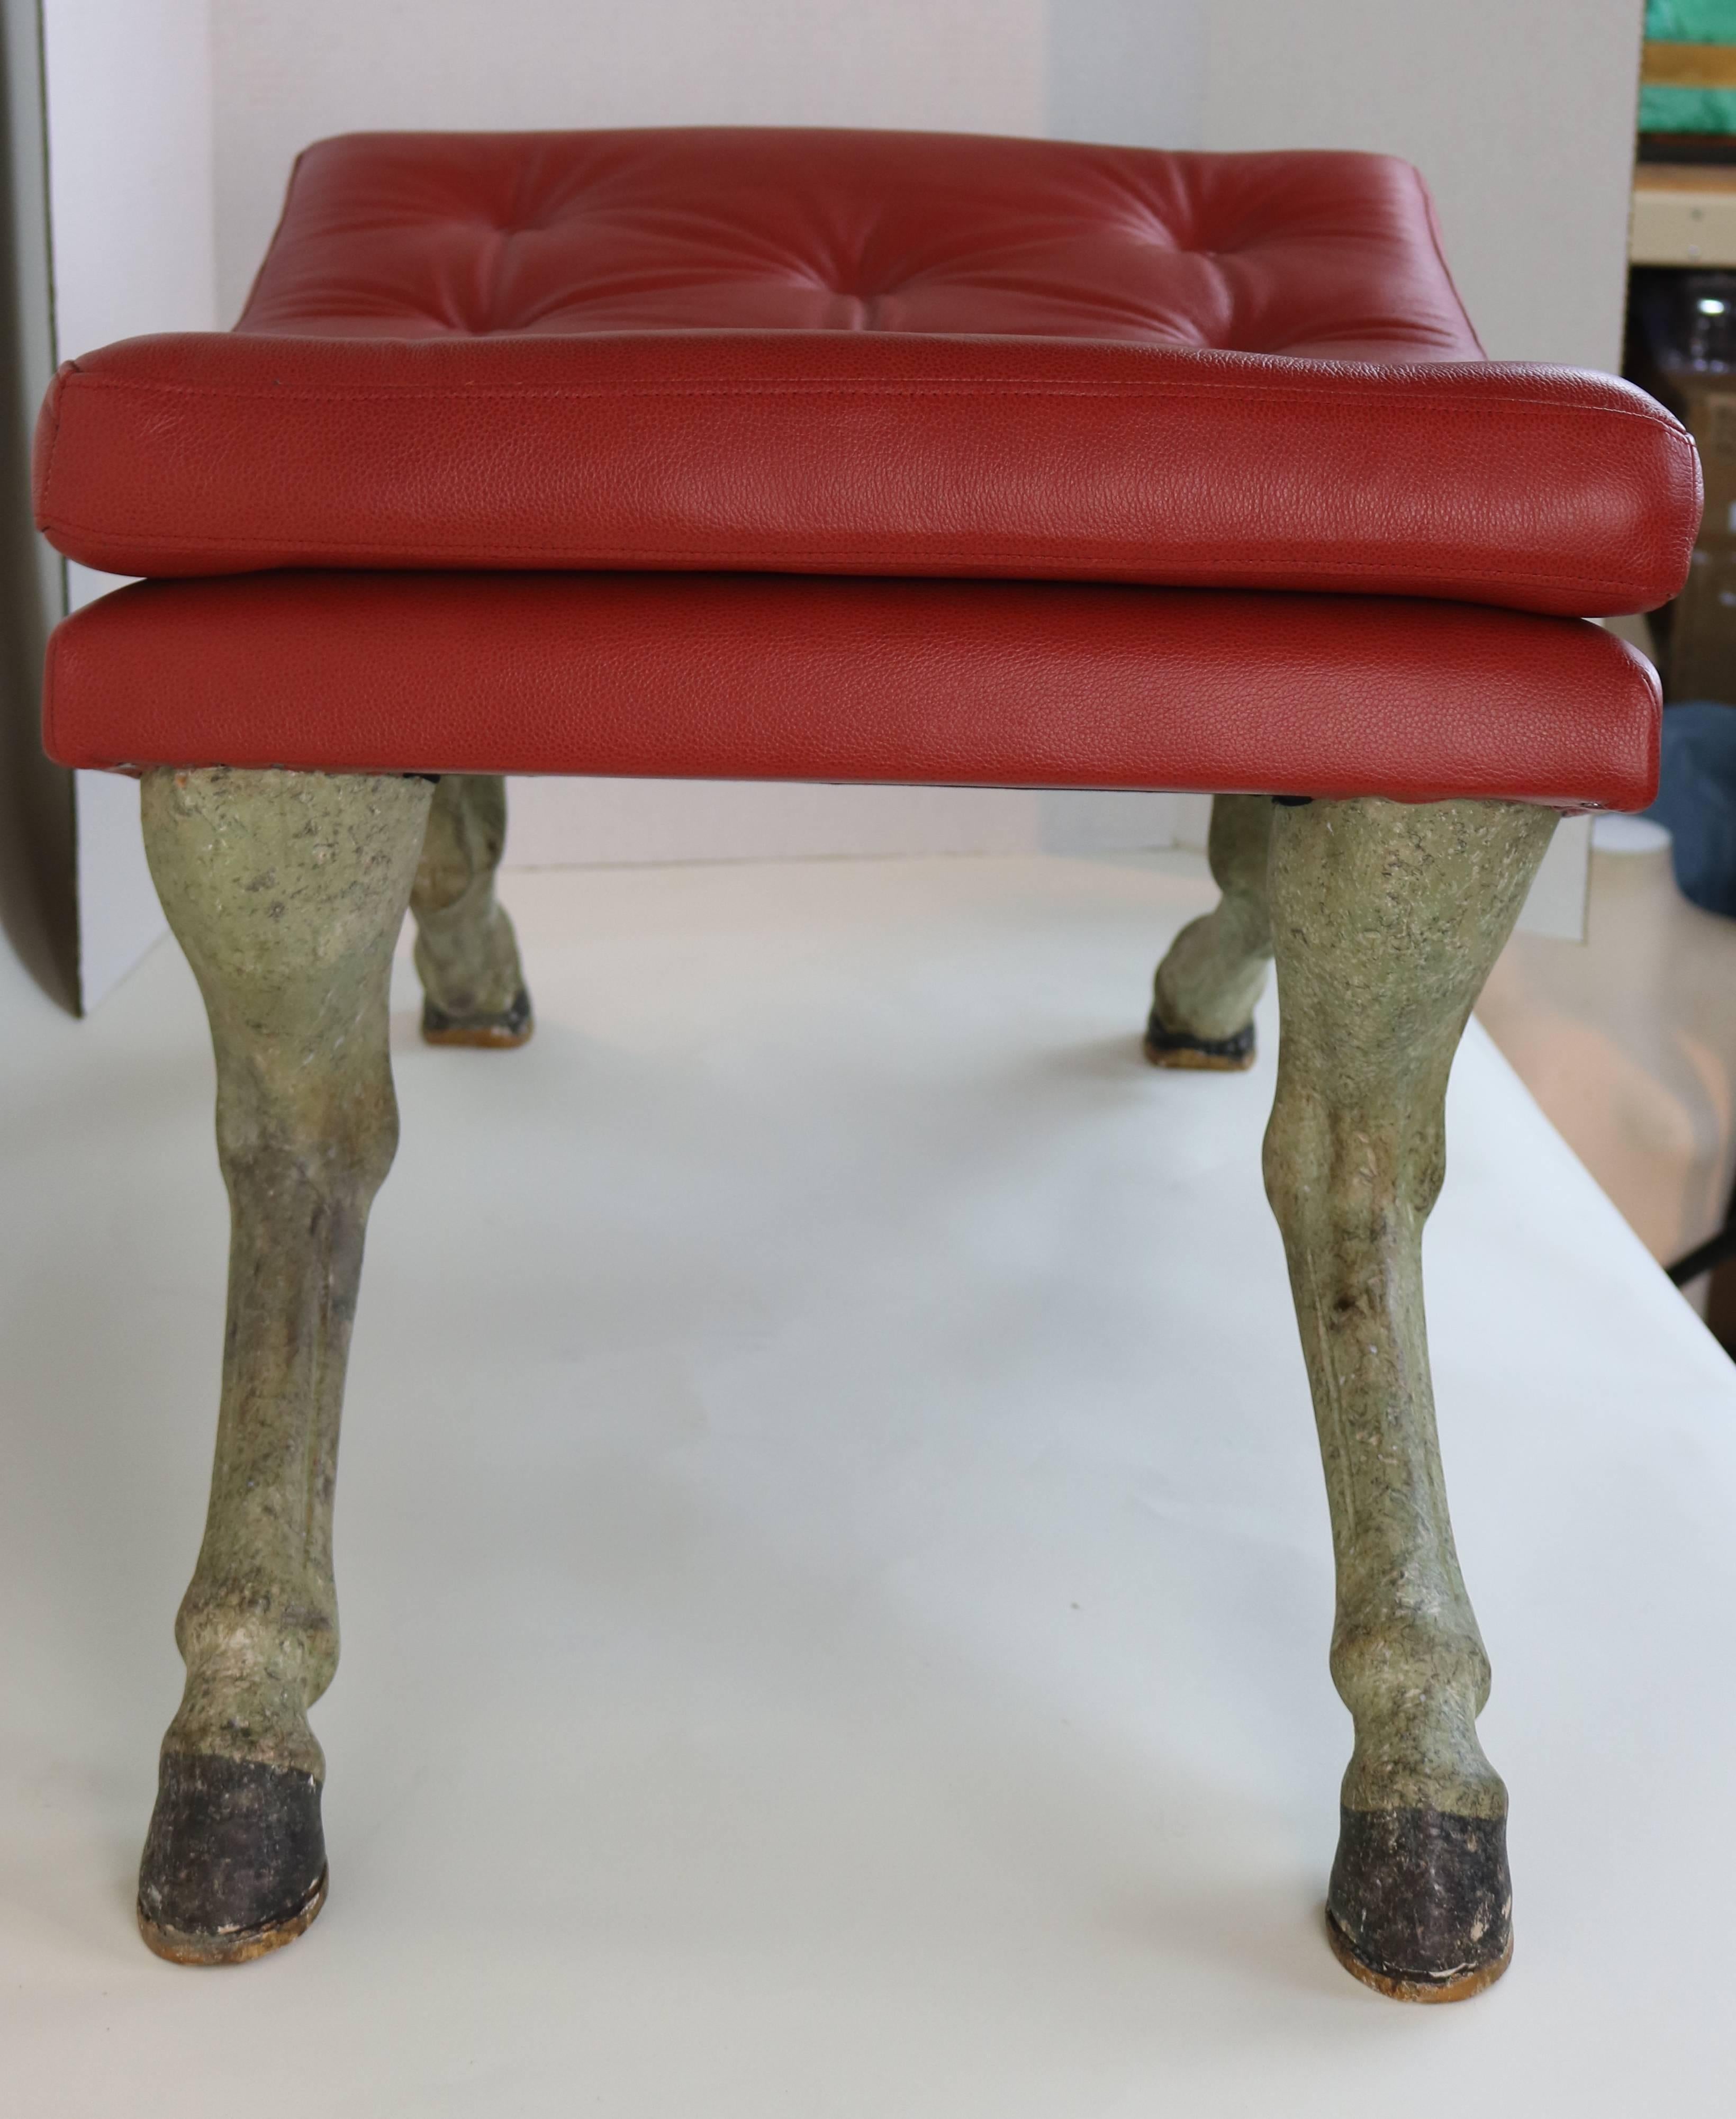 Art and style merge in a sophisticated fashion forward antiqued painted hoof leg base with persimmon button tufted leather upholstered seat ottoman.
Looks perfectly at home in interiors of any theme or era,
its unique styling draws comment and